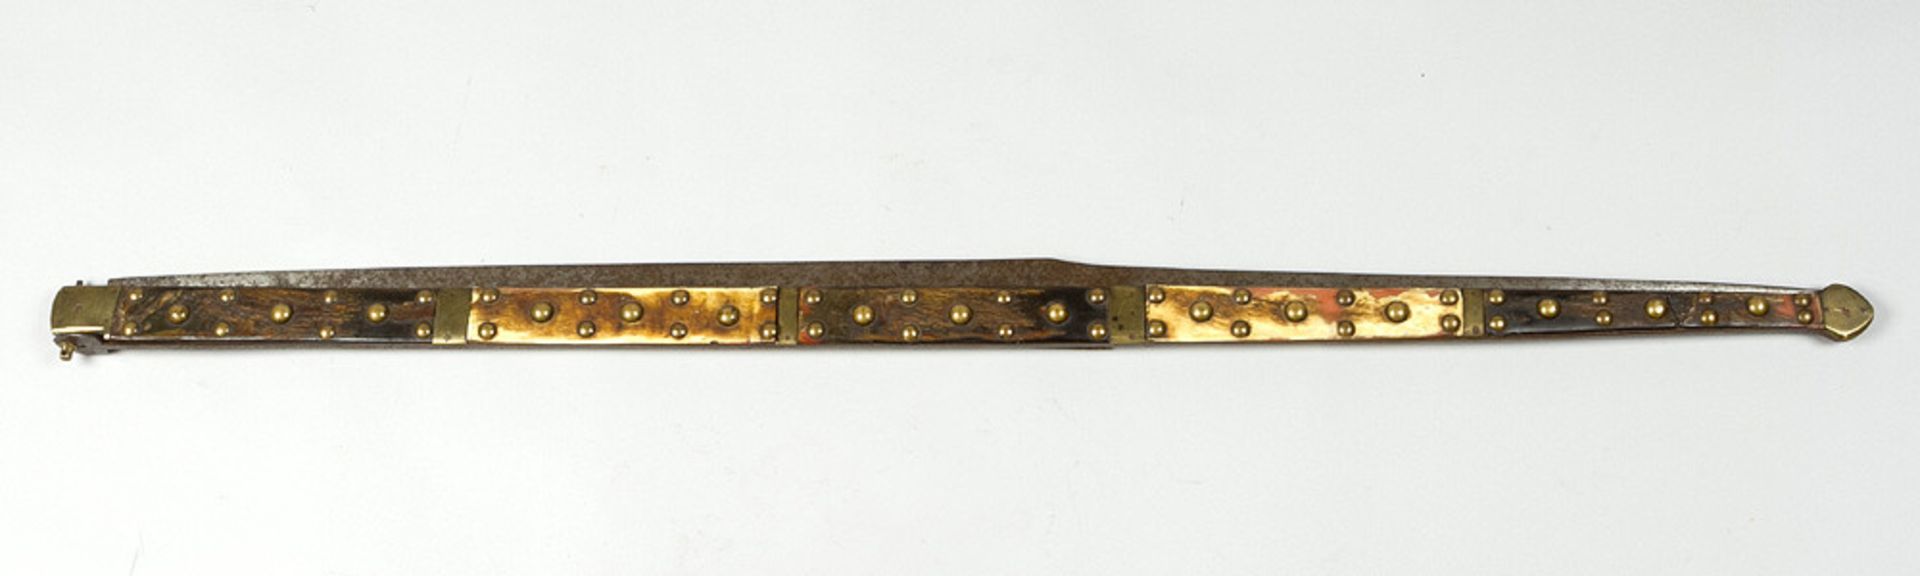 Unusual jacksword, Asian in blade, decorated and script signs, 19th Century. Total Length: 175 cm